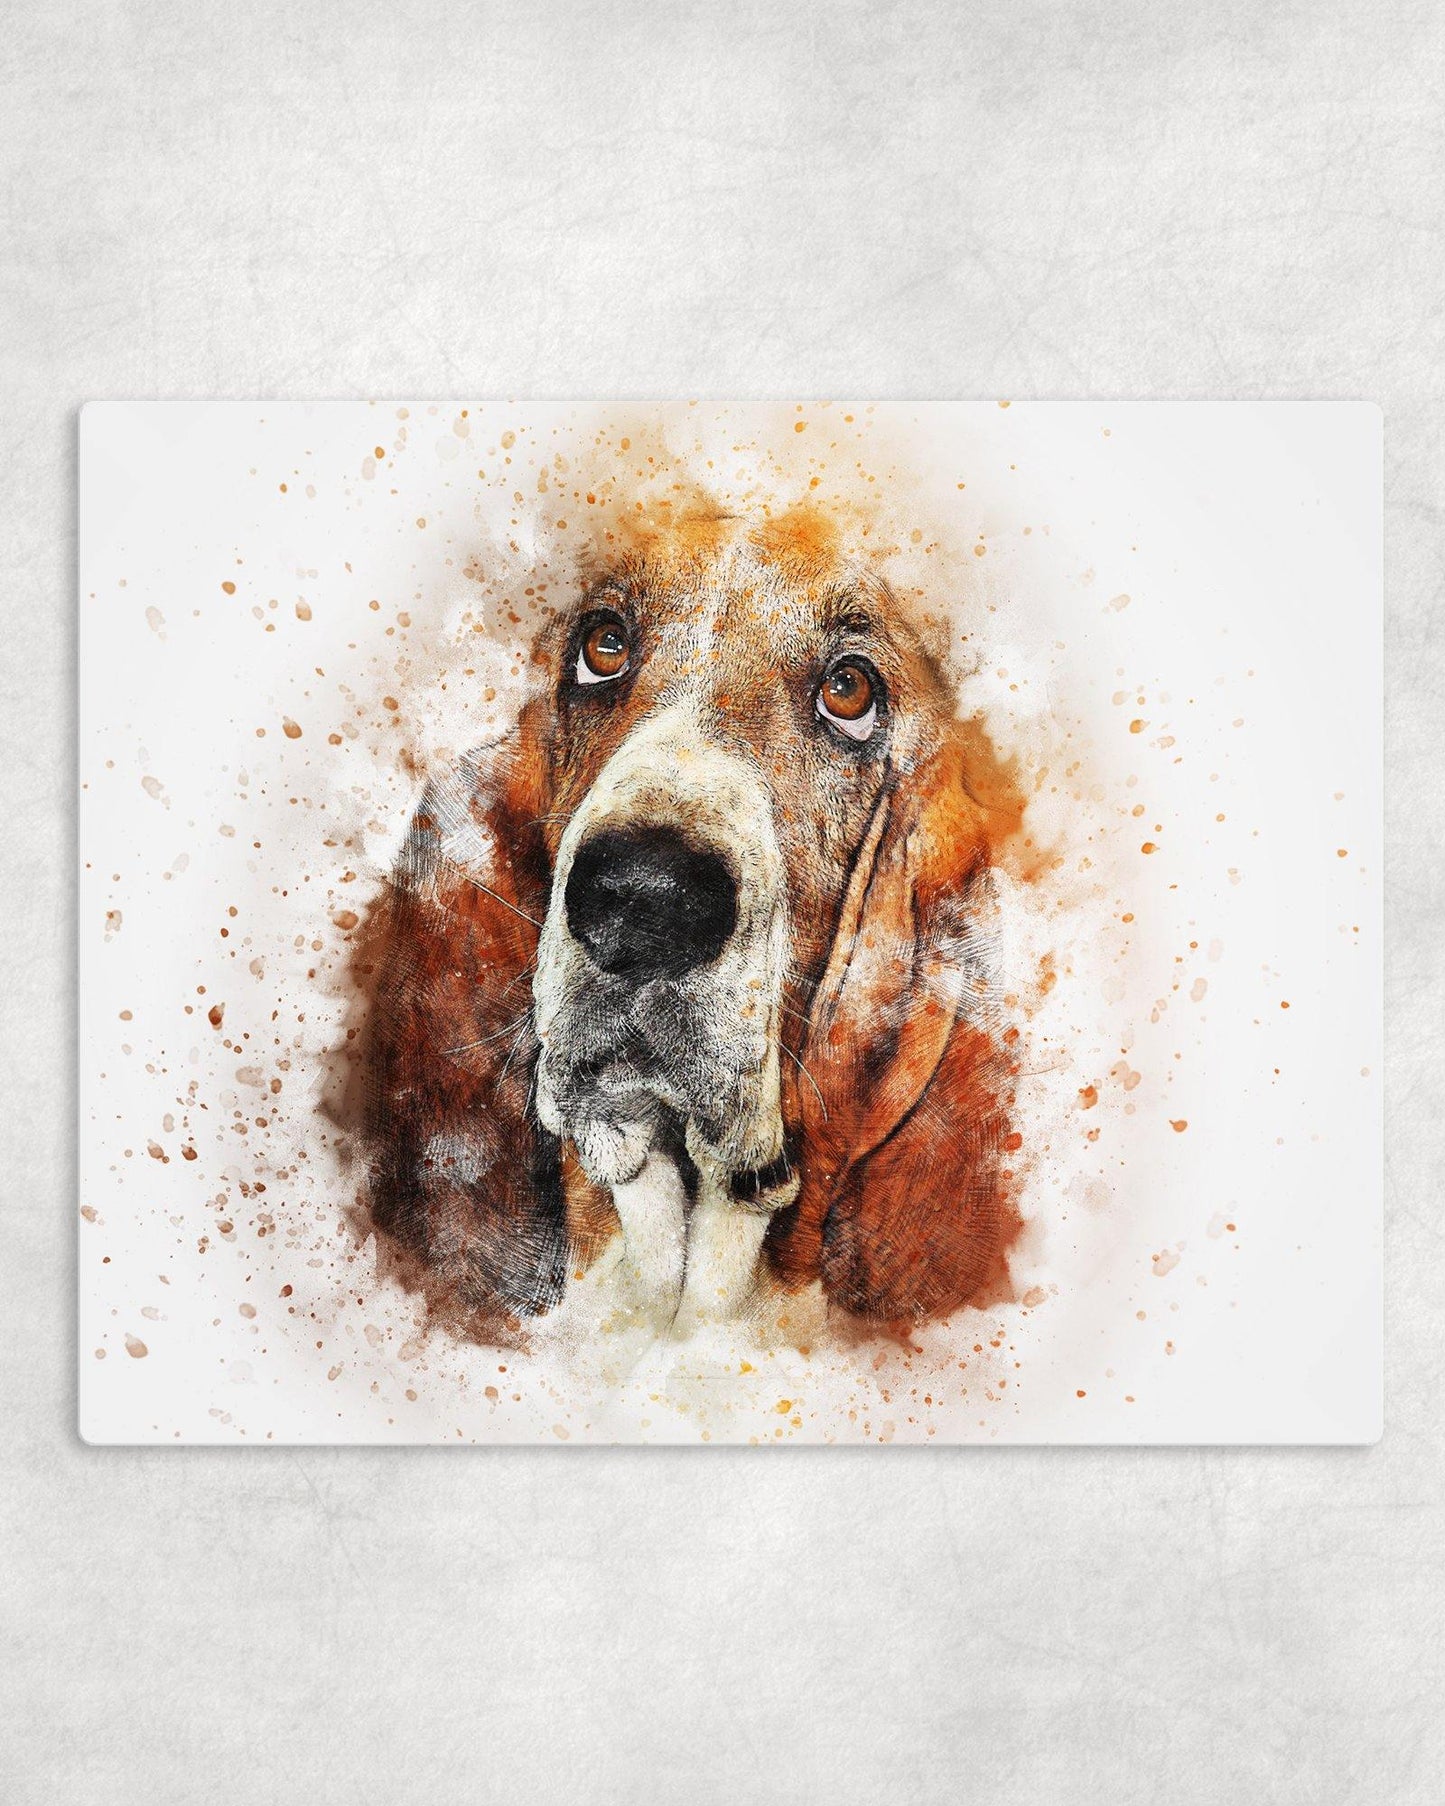 Watercolor Style Basset Hound Metal Photo Panel - 8x10 - Schoppix Gifts